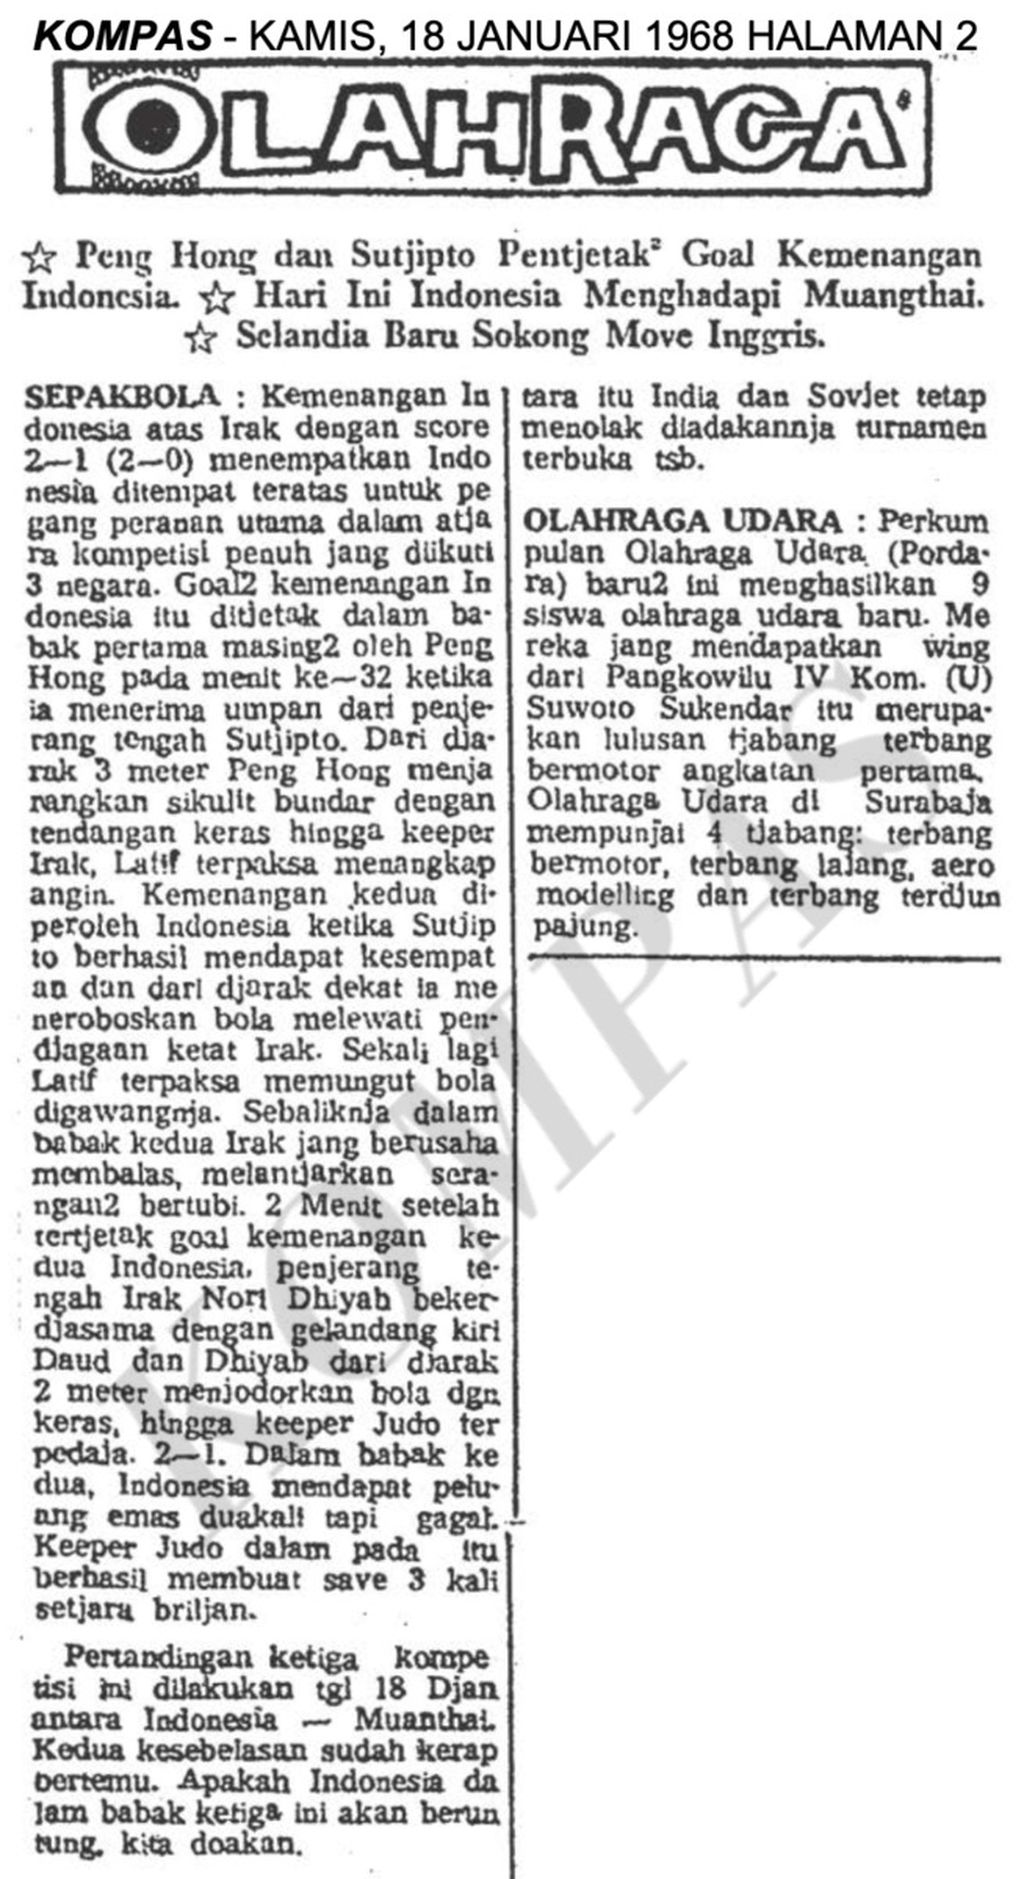 <i>Kompas</i> News edition of 18 January 1968 regarding Indonesia's first duel against Iraq in the 1968 Mexico Olympic Qualification.